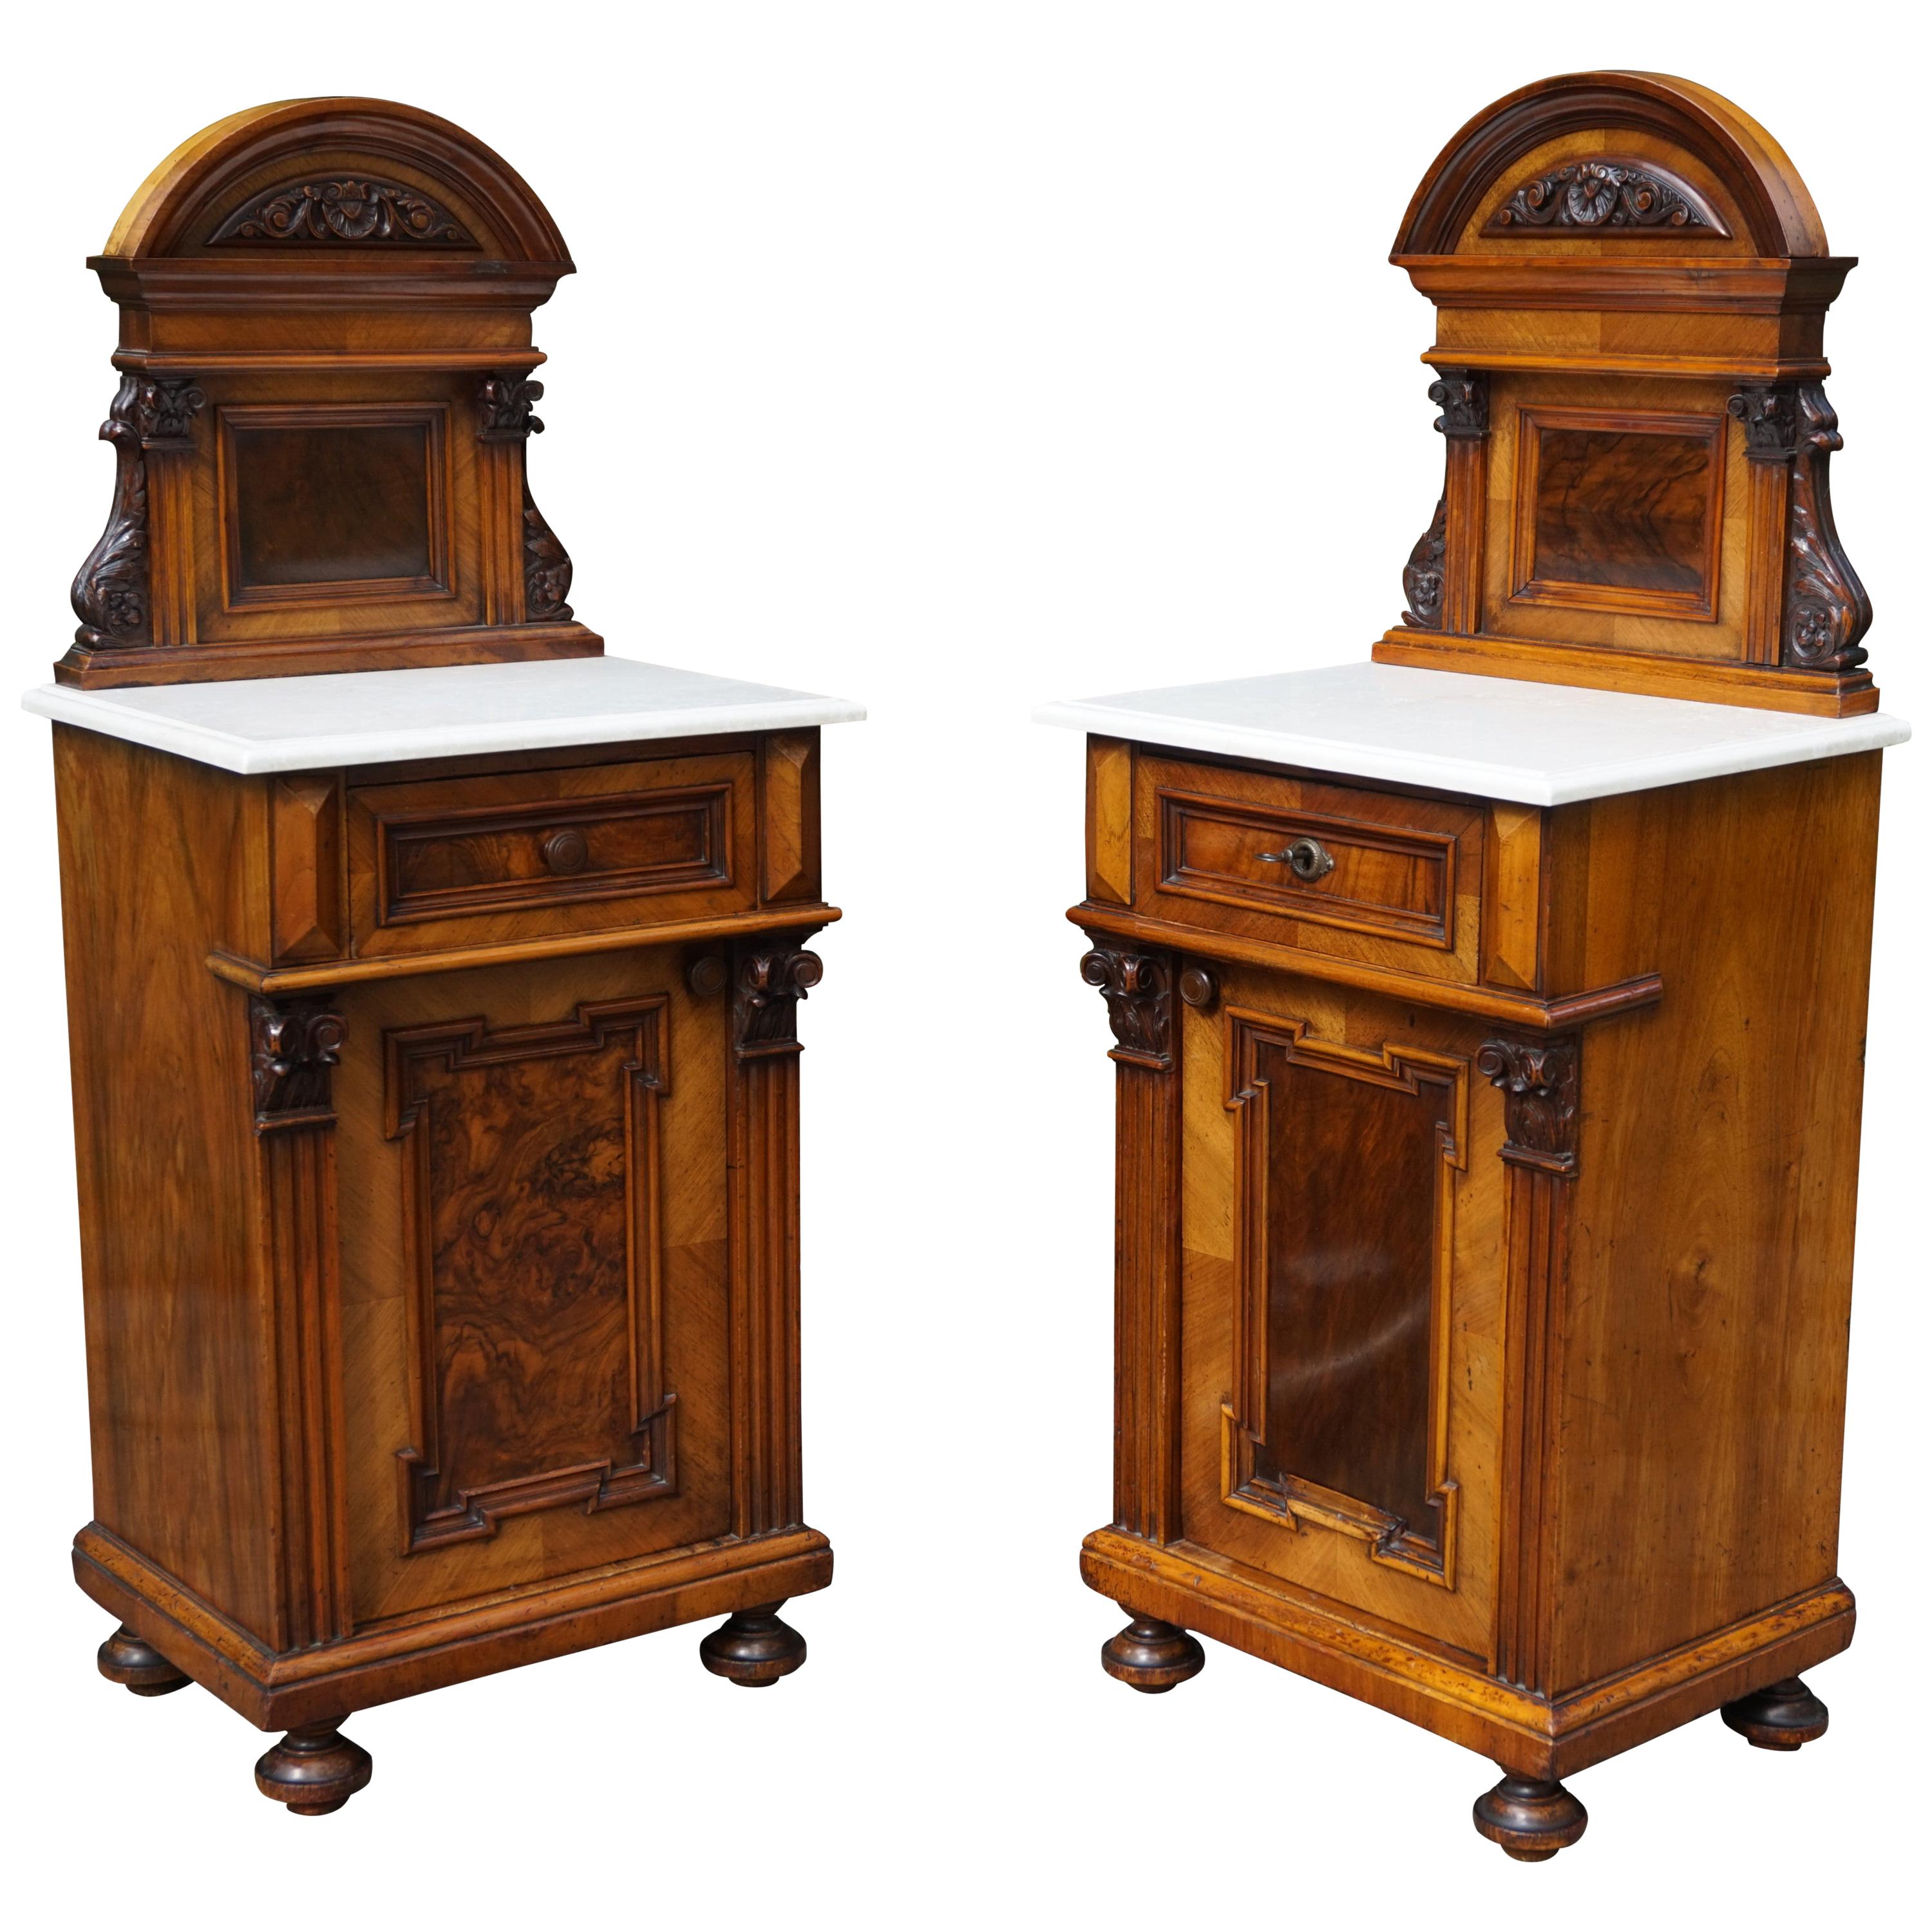 Rare Pair of Antique Victorian Night Stands / Bedside Cabinets with Marble Tops